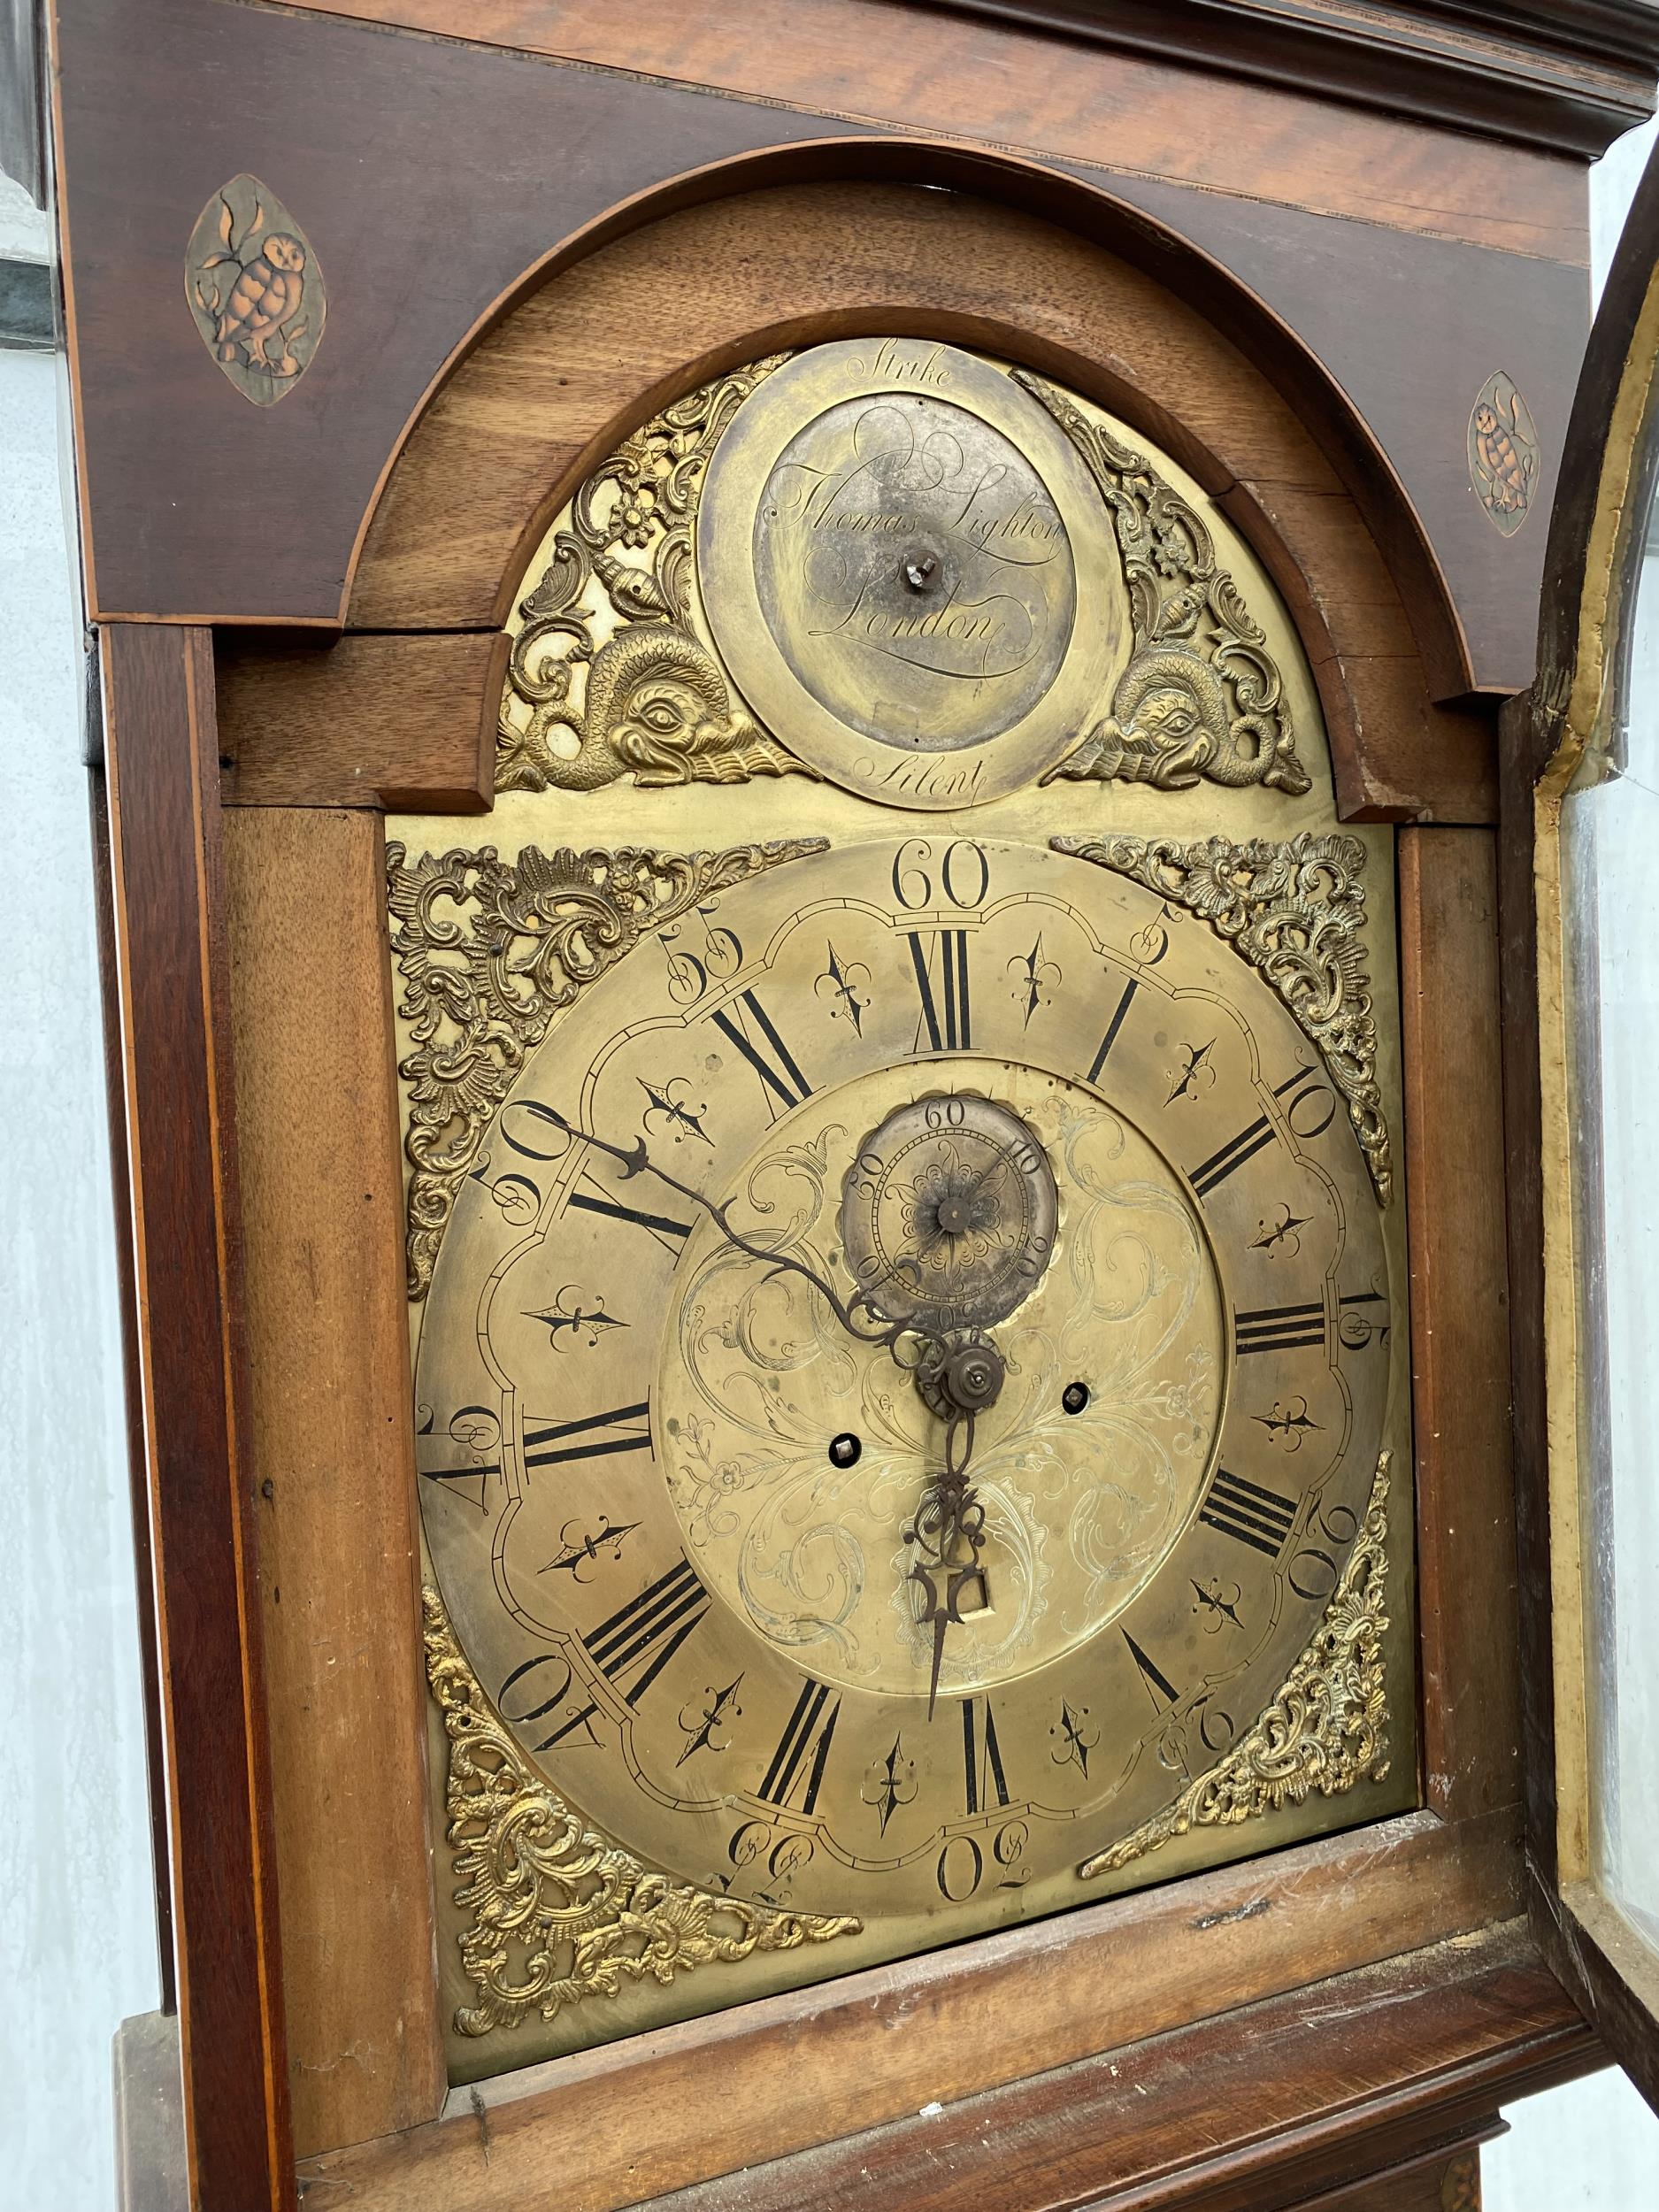 AN 18TH CENTURY MAHOGANY EIGHT-DAY LONGCASE CLOCK WITH BRASS FACE AND INLAID OVALS DEPICTING BIRDS - Image 6 of 12